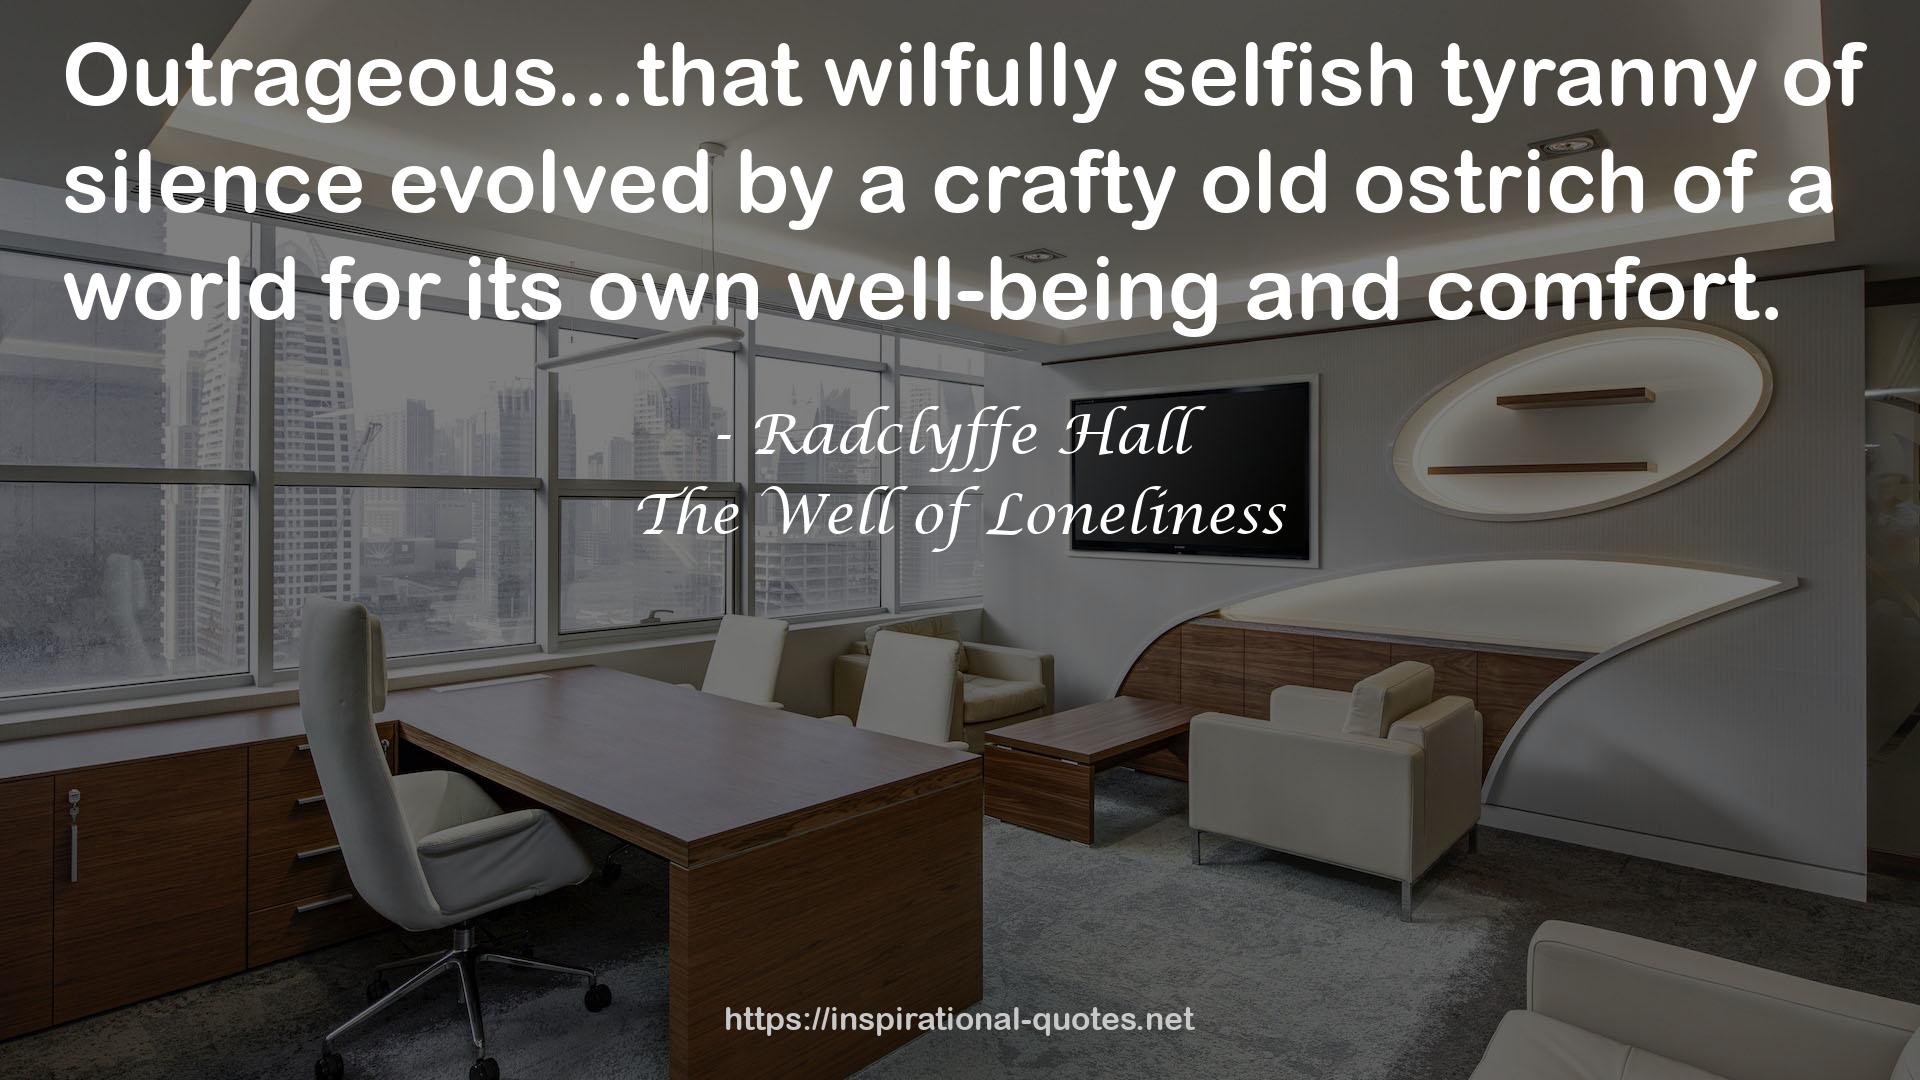 Radclyffe Hall QUOTES